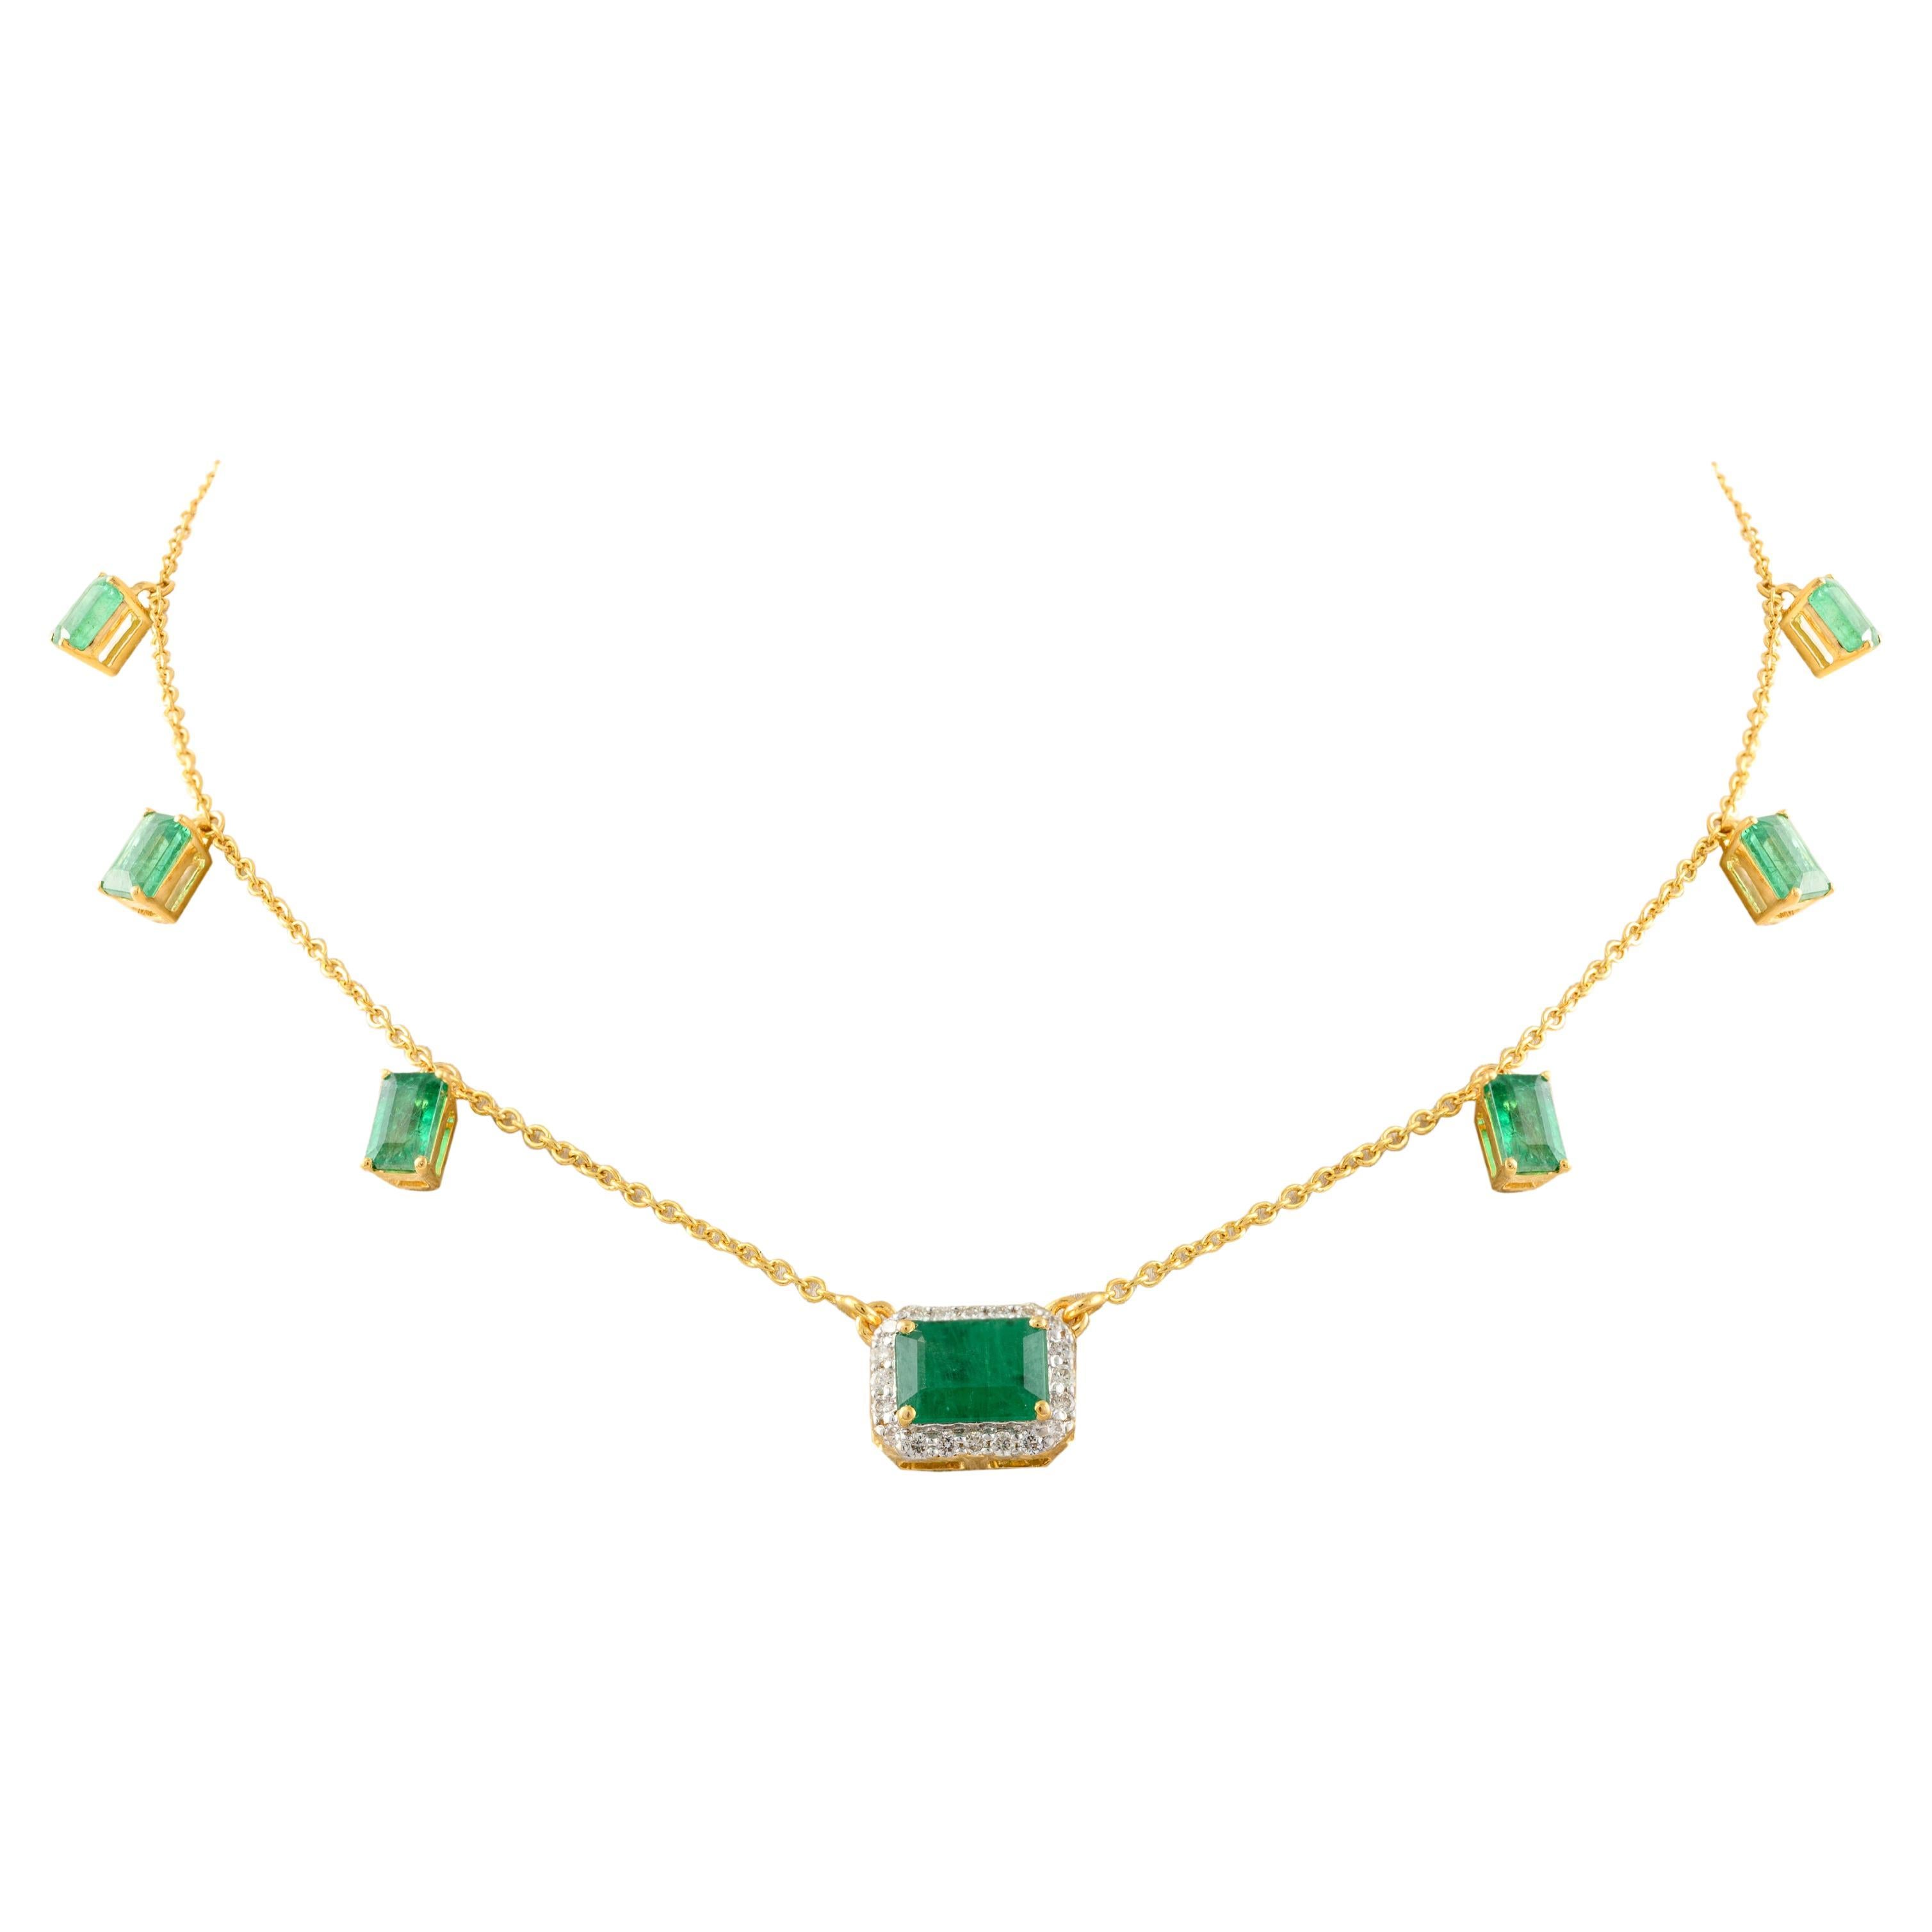 Emerald Charm Necklace 14k Yellow Gold, Emerald Fine Jewelry Gift For Women